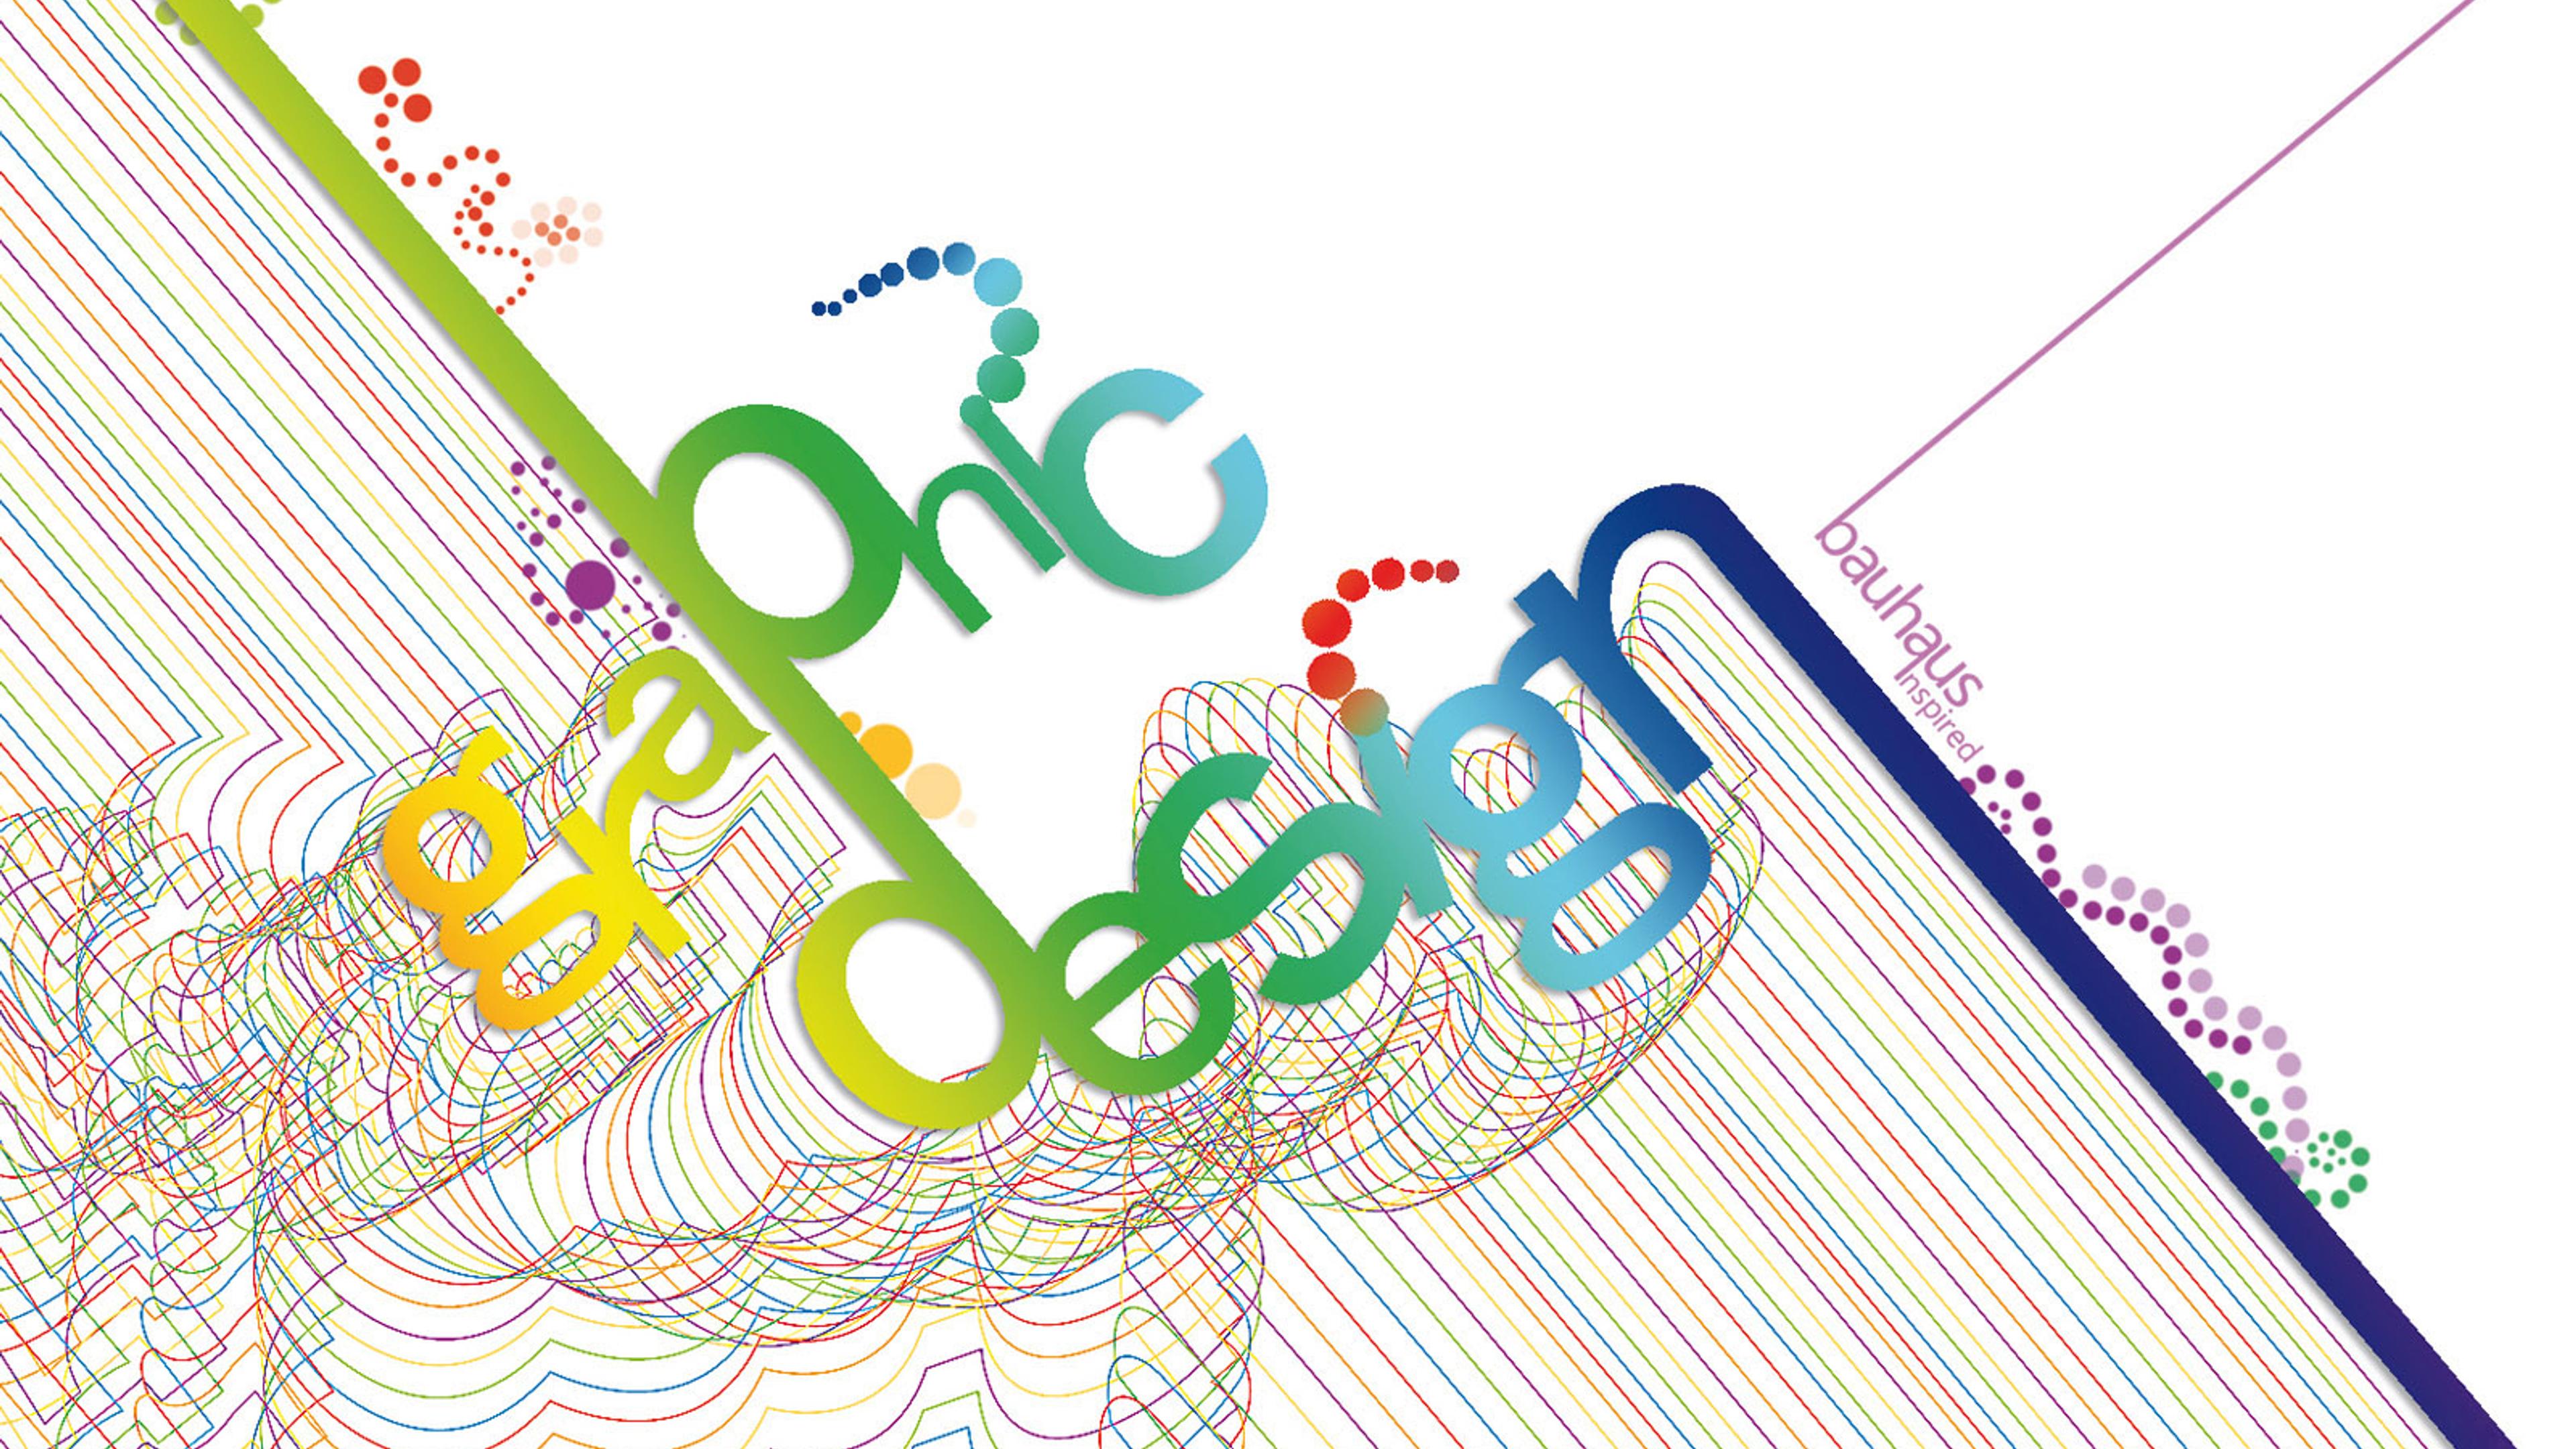 Many colorful lines in a graphic design wallpaper